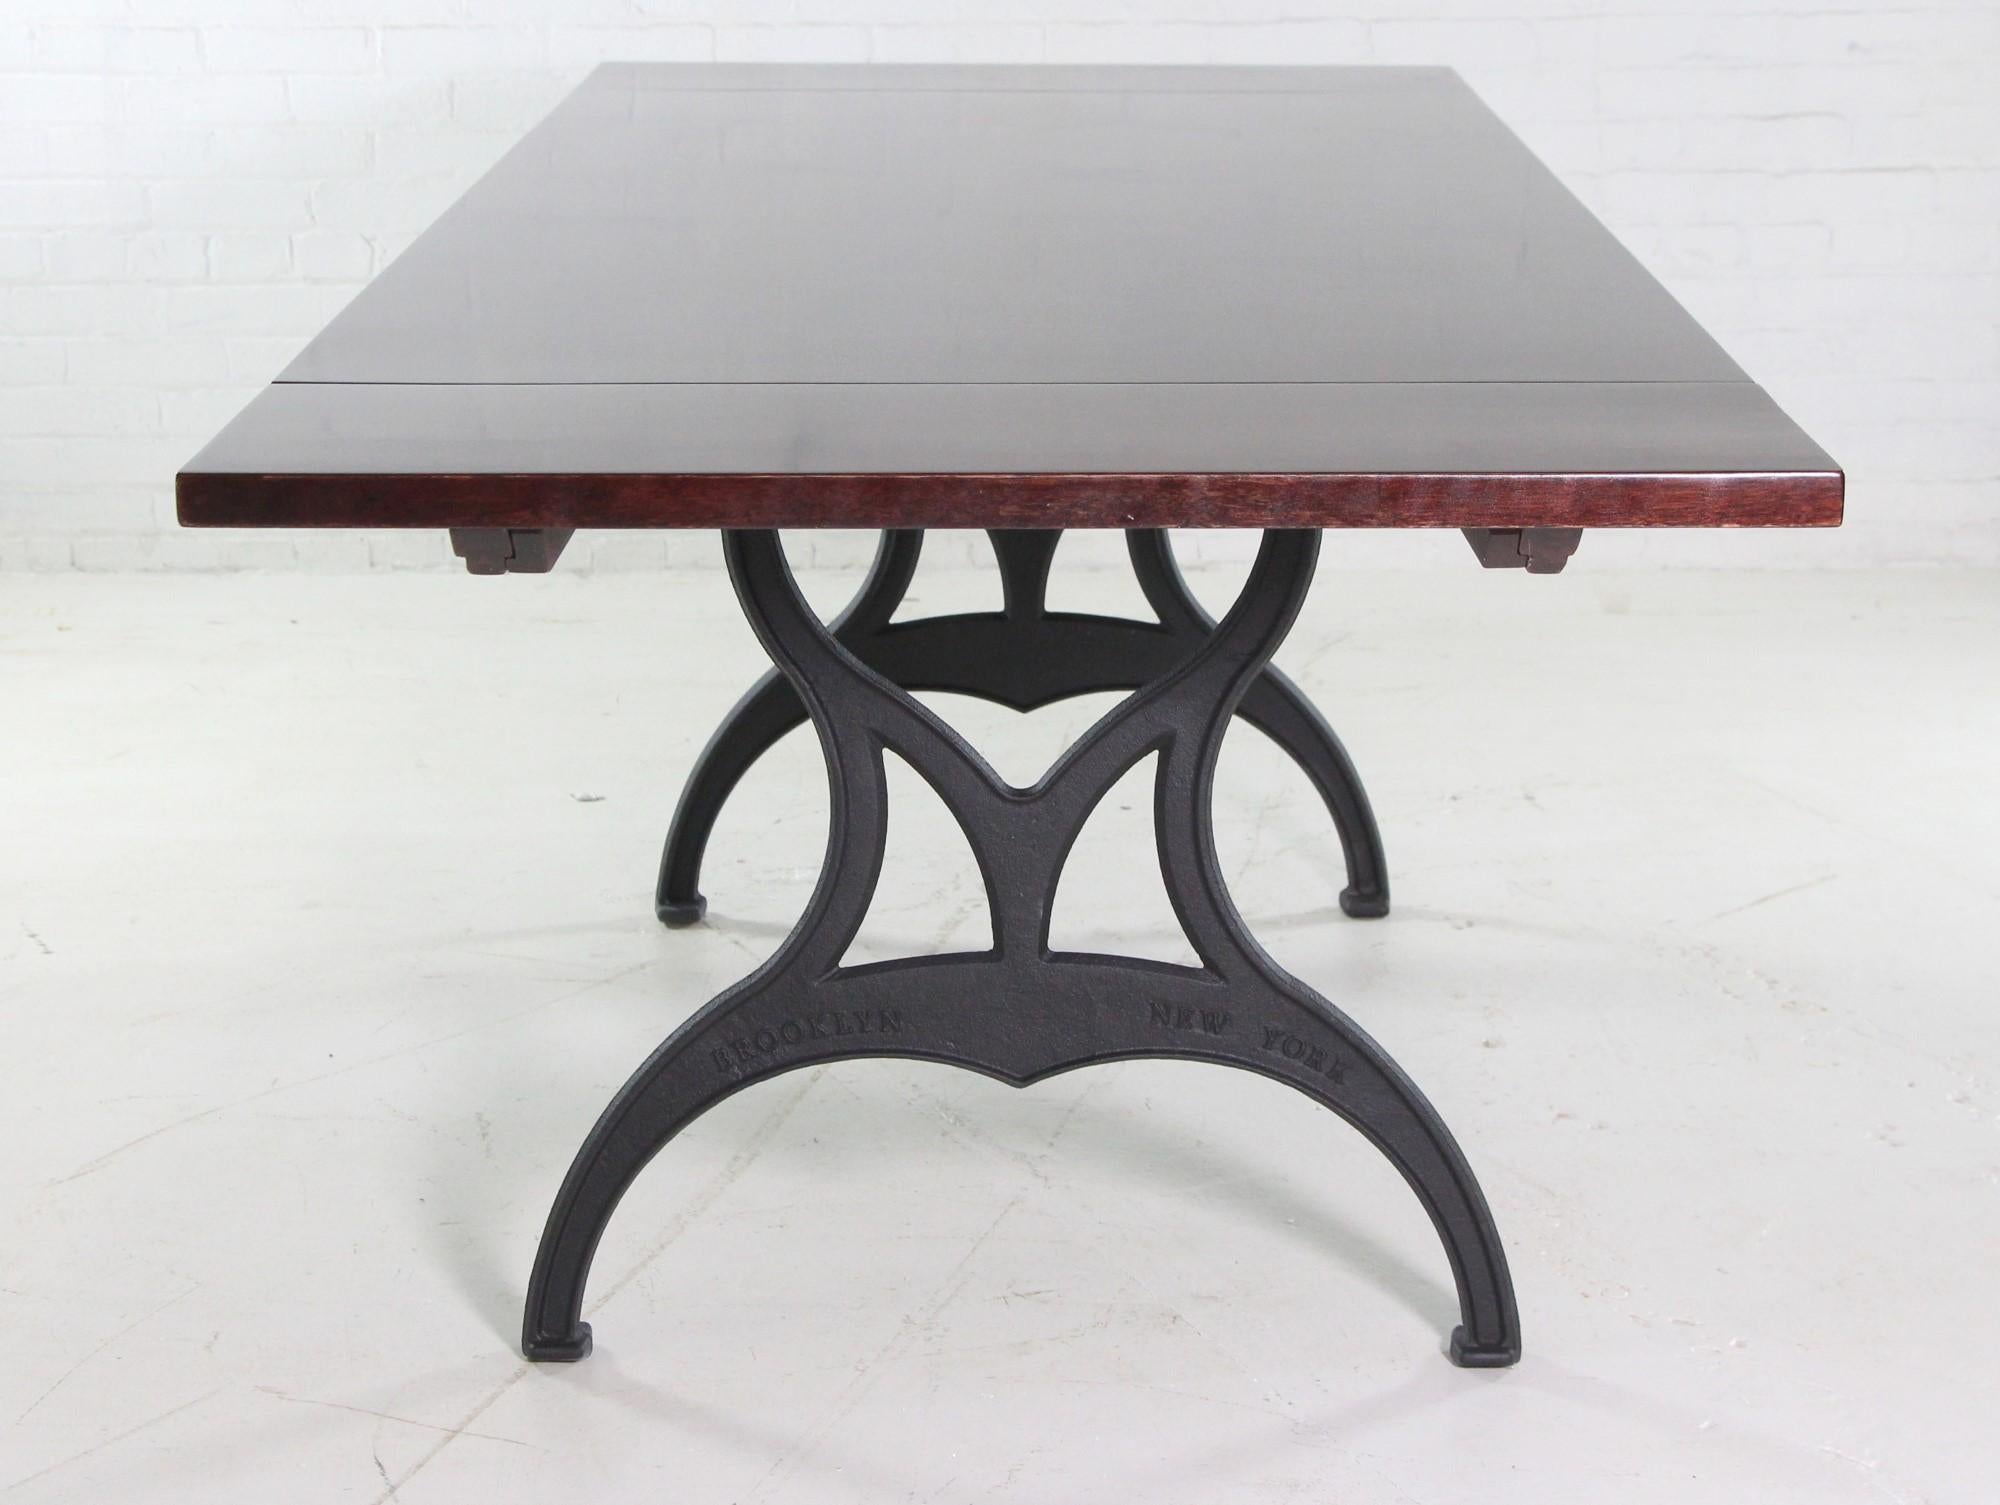 Red Mahogany Apitong Table w Extensions Cast Iron Legs Brooklyn, NY For Sale 1